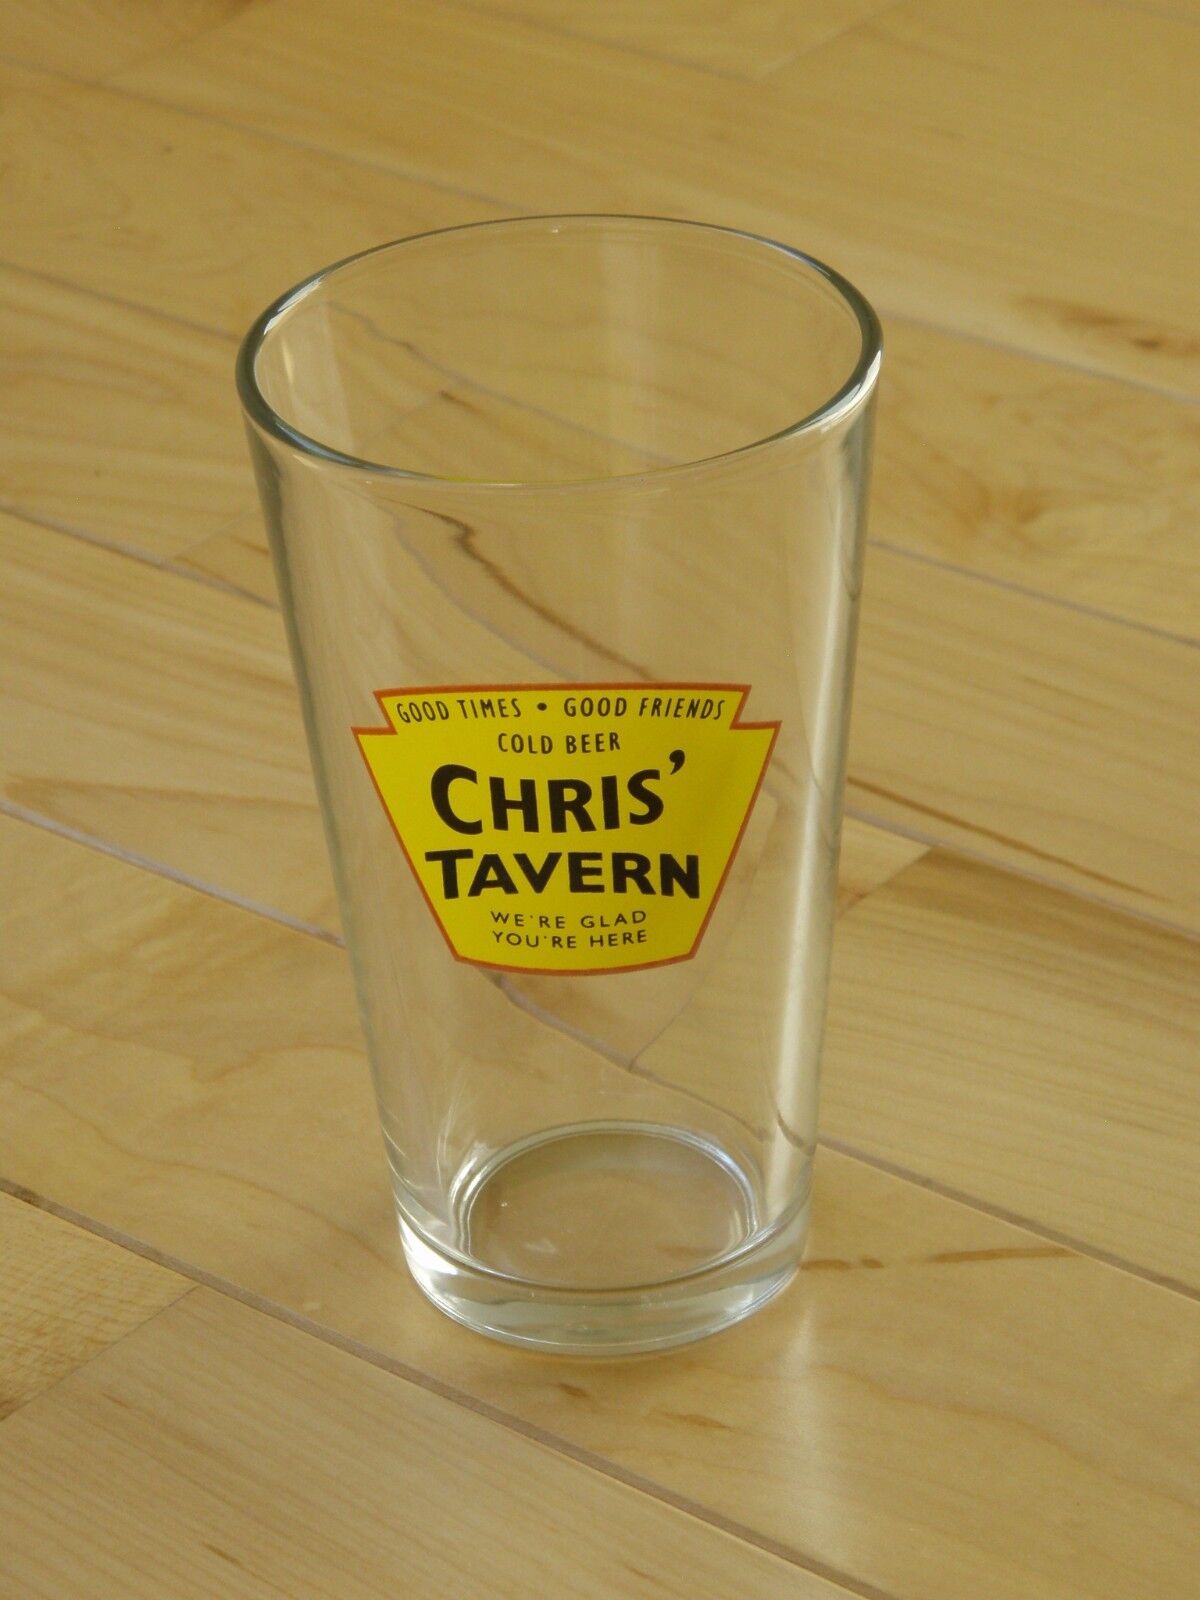 Chris\' Tavern - Pint Beer Glass - Good Times Friends Cold Beer